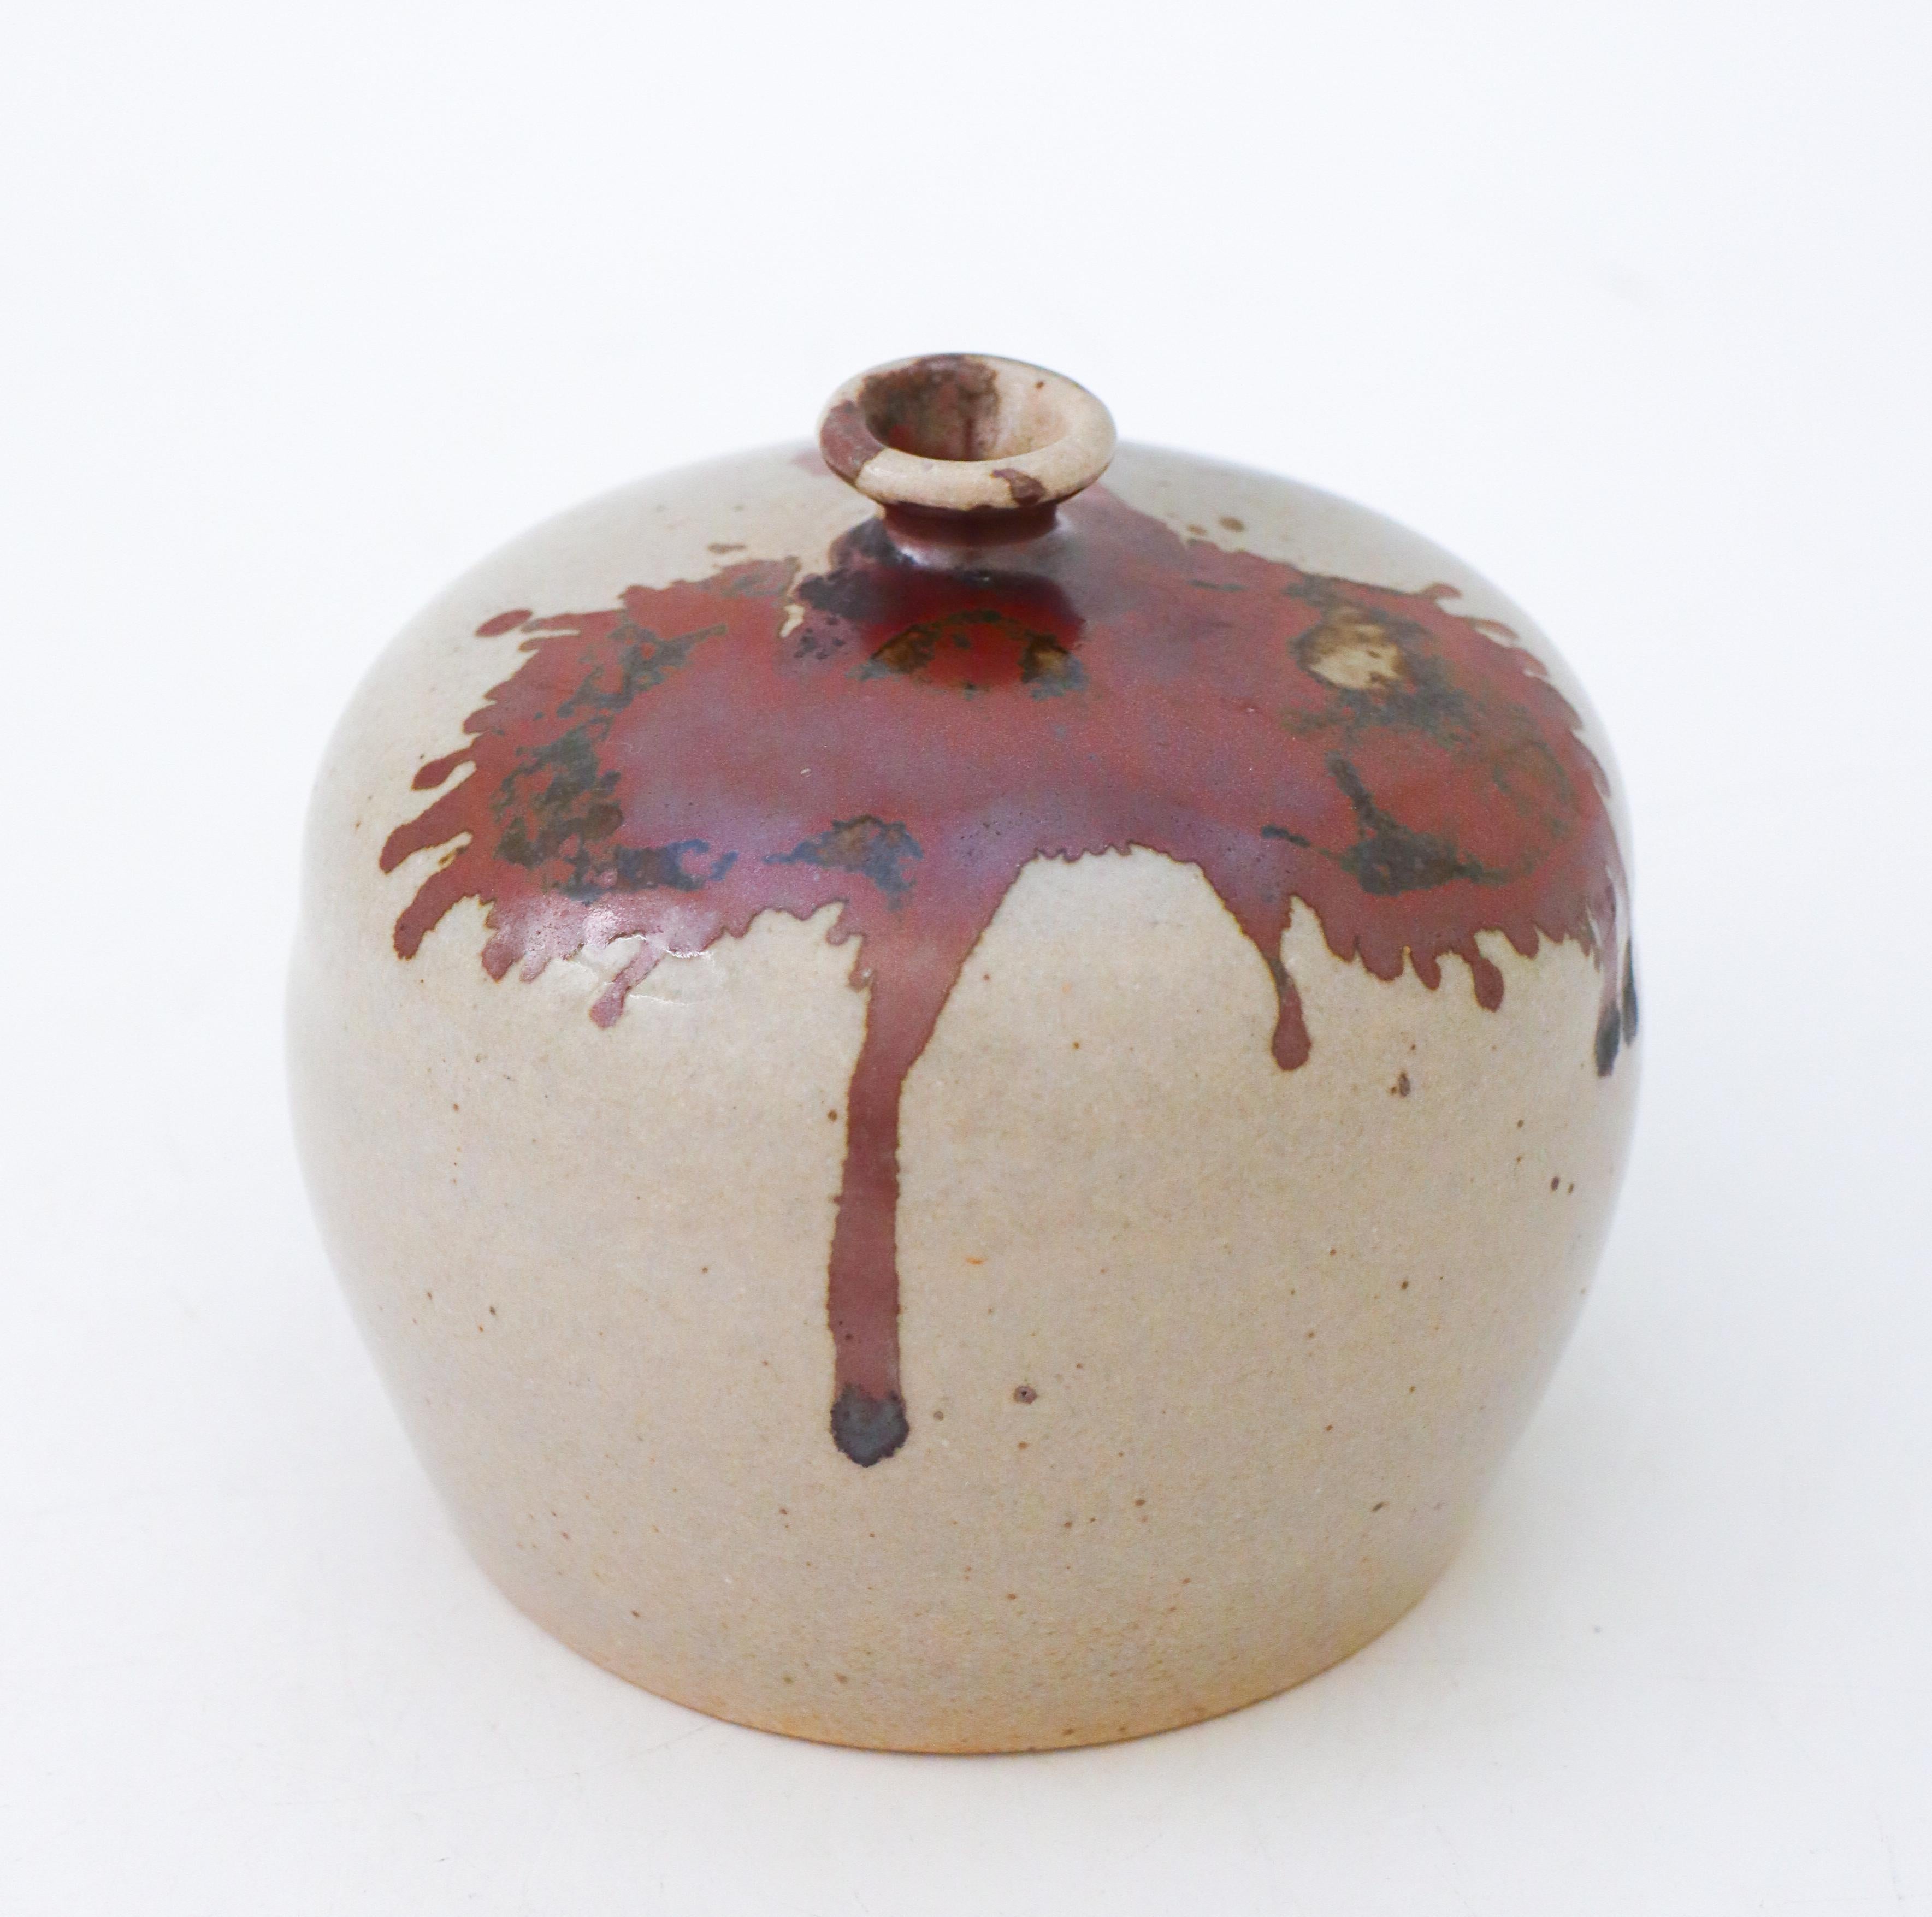 A beautiful vase designed by the Swedish ceramicist Claes Thell in his workshop in Höganäs, Sweden in the late 20th century. The vase is in excellent condition and marked below. 